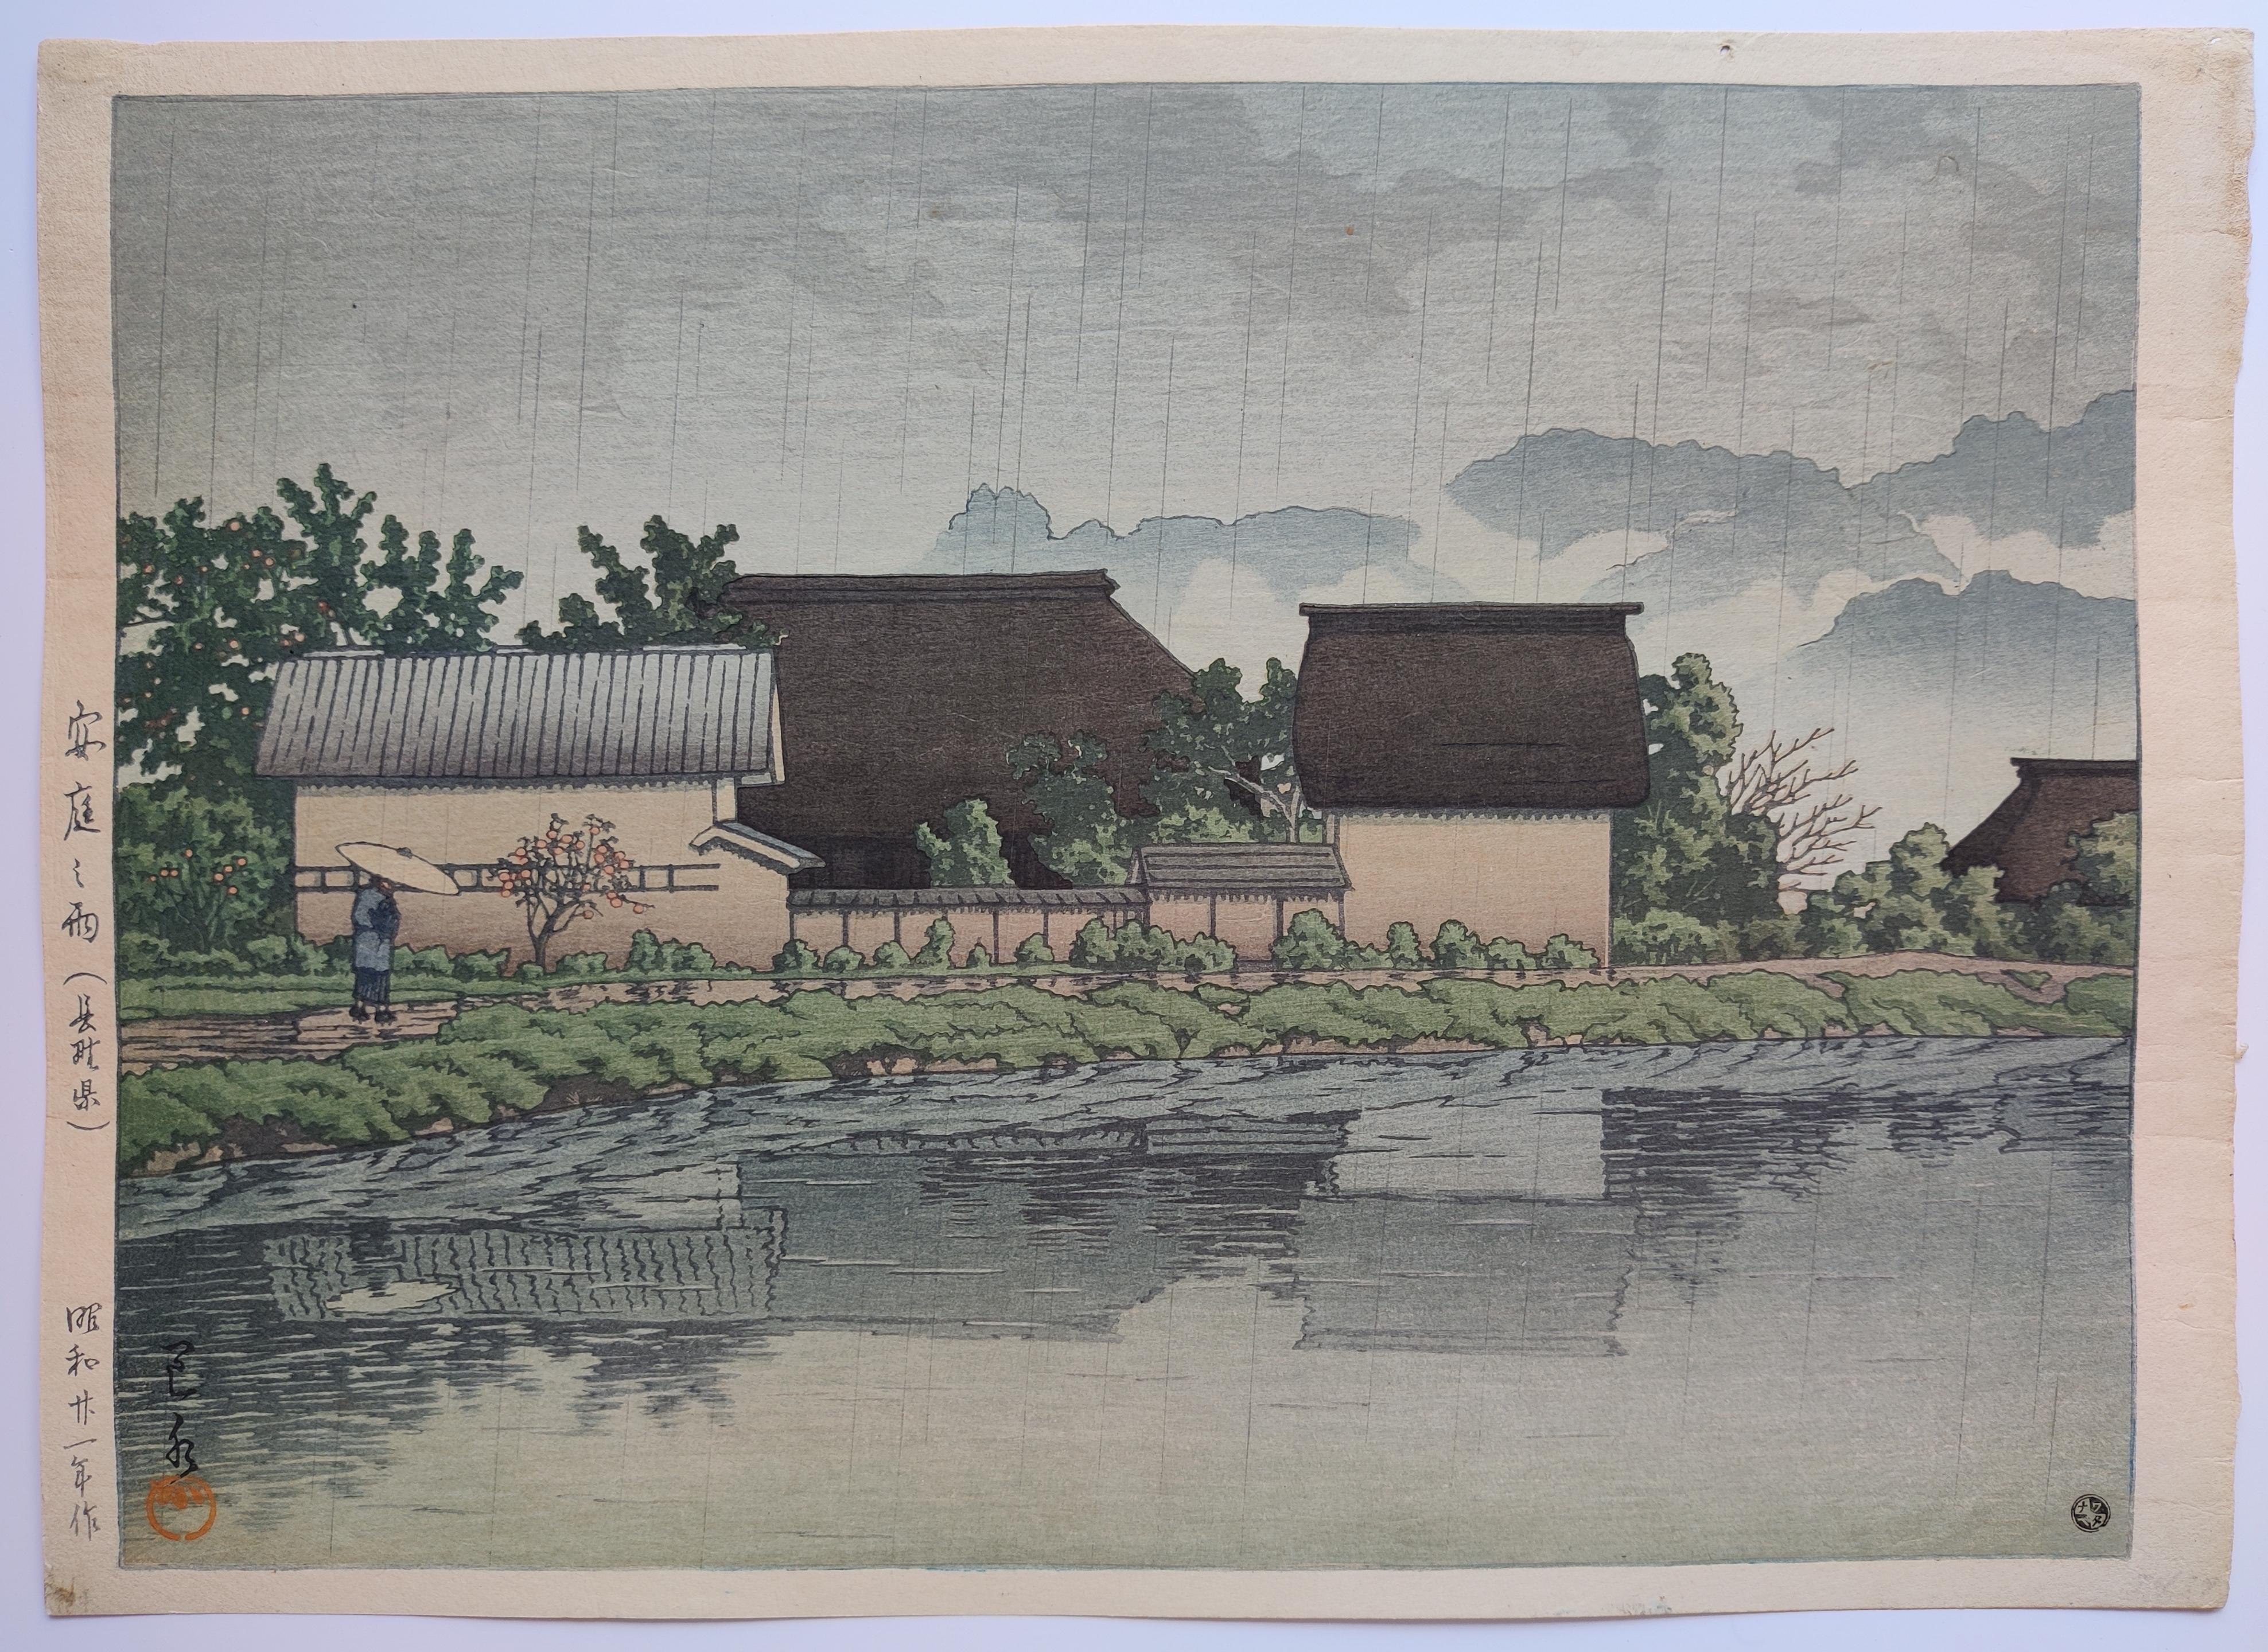 Kawase Hasui
Rain at Yasuniwa (Nagano), 1946
woodcut in colours
Signed on the block, sealed, titled and dated in ink
Publisher: Shozaburo Watanabe, with his 6mm seal
The first state
Image size: 24.5×33.5cm 
Sheet size: 26.2×36.5cm

